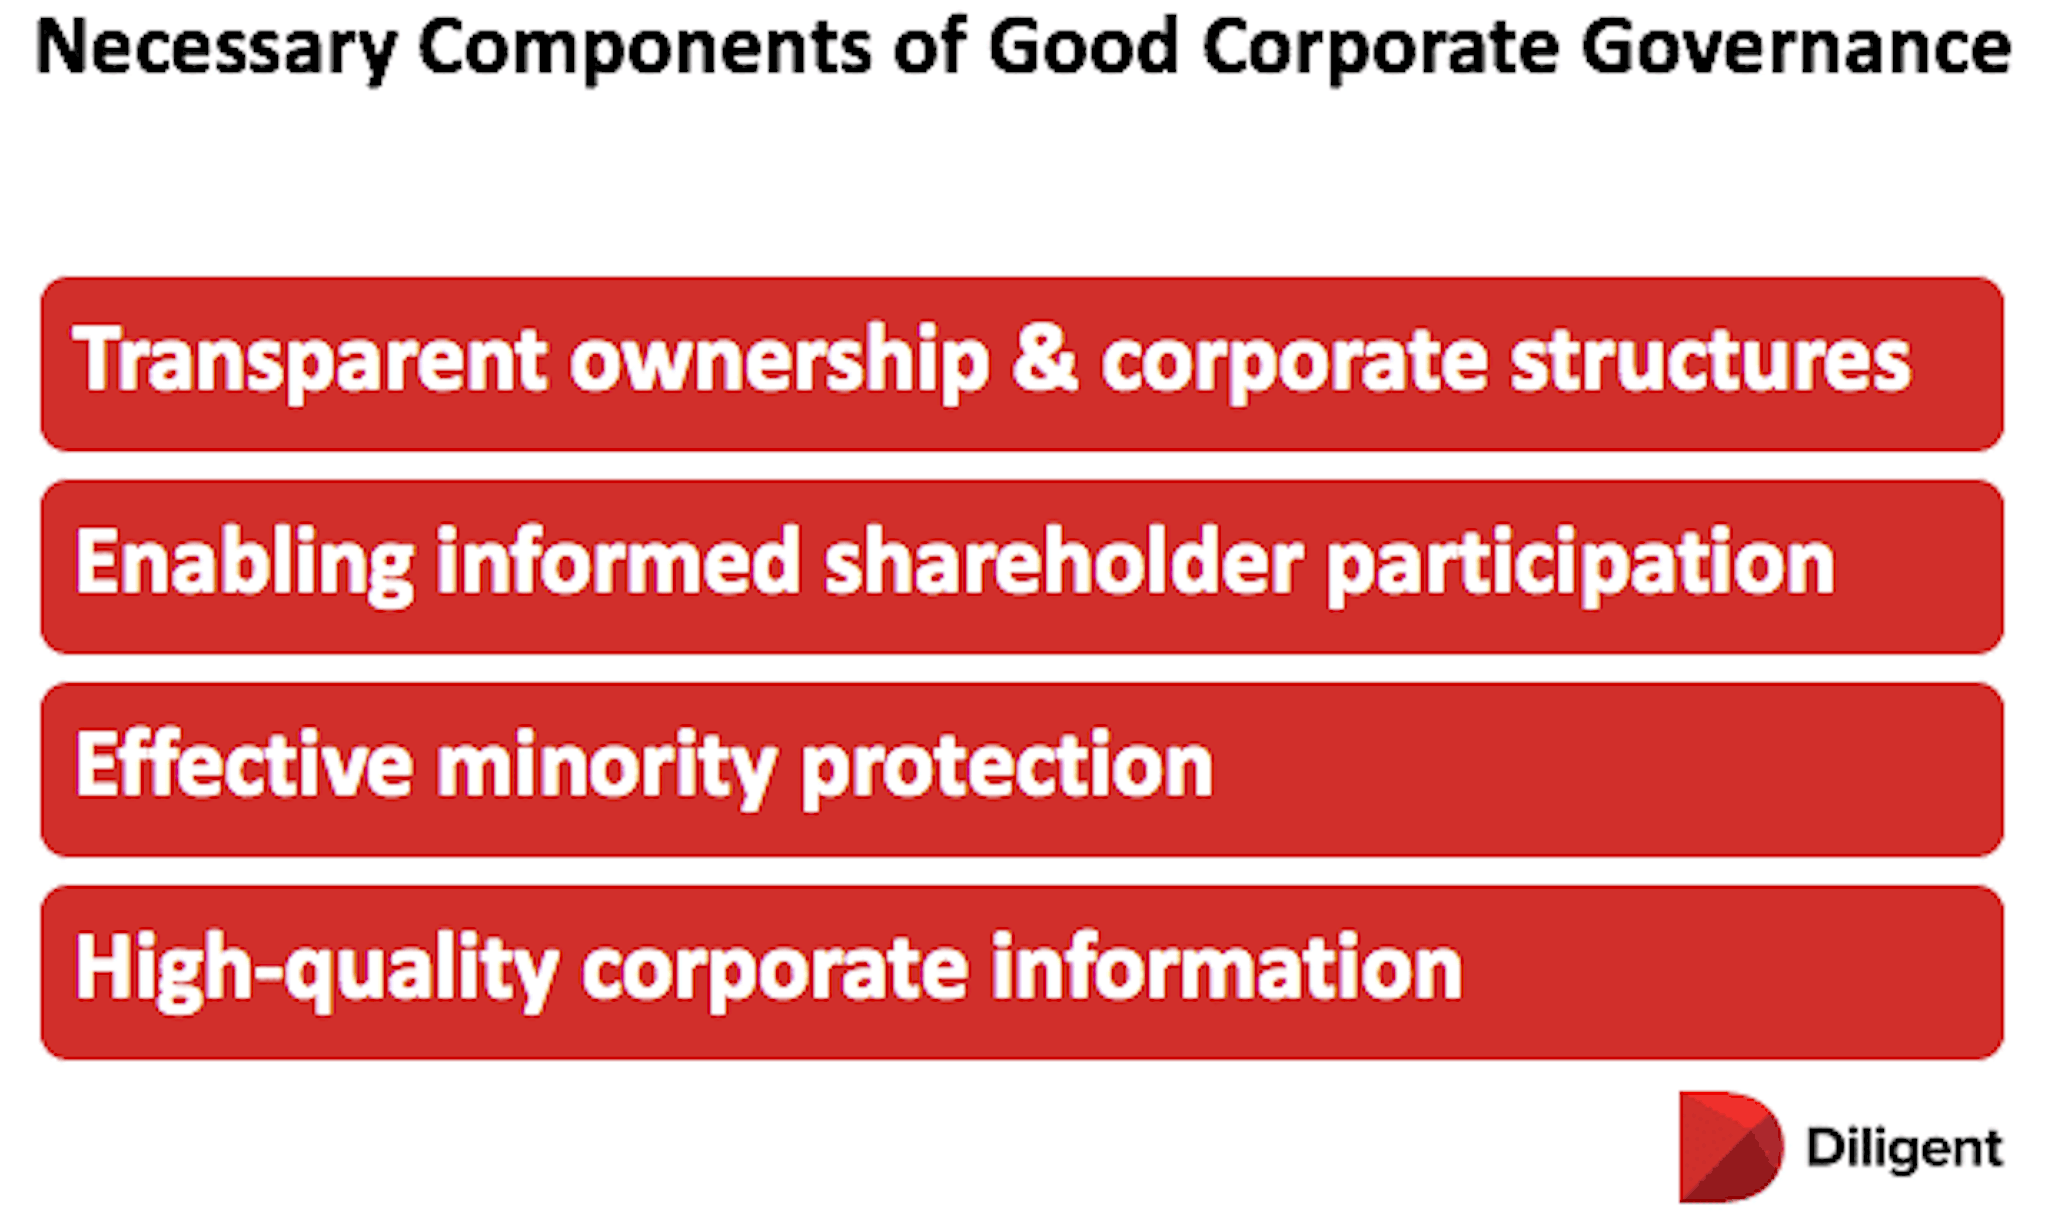 Framework outlining necessary components of good corporate governance